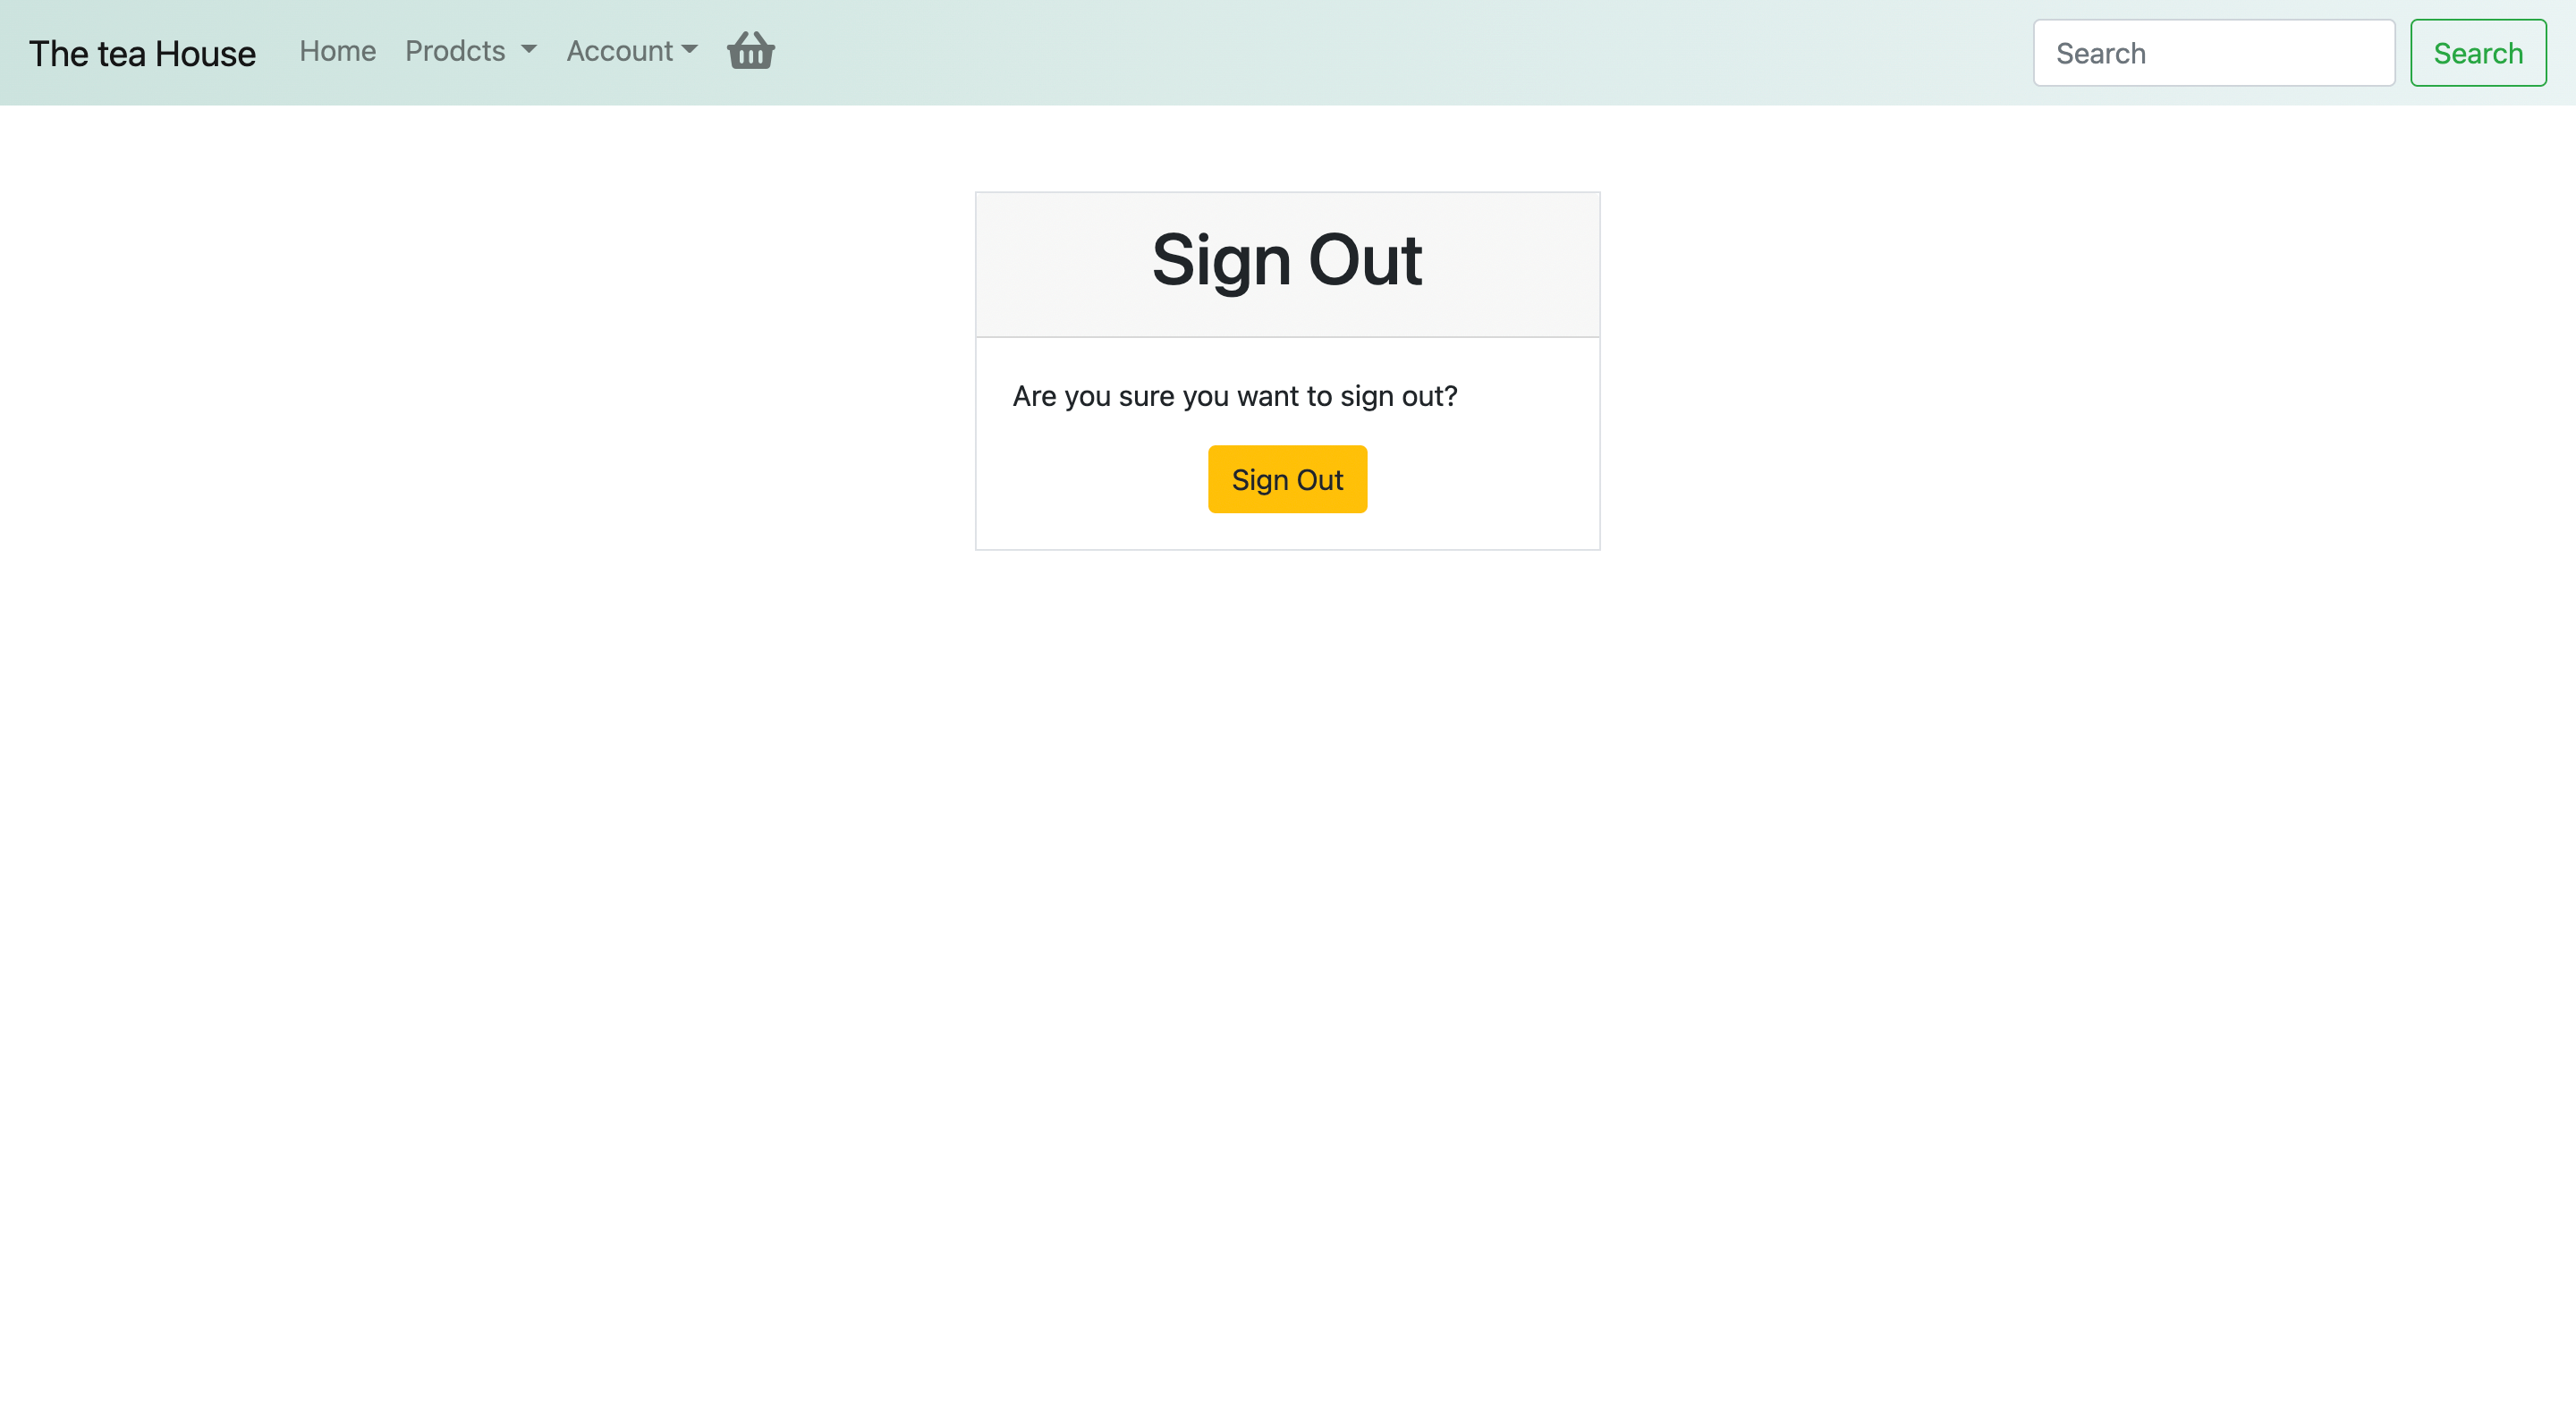  Sign out feature